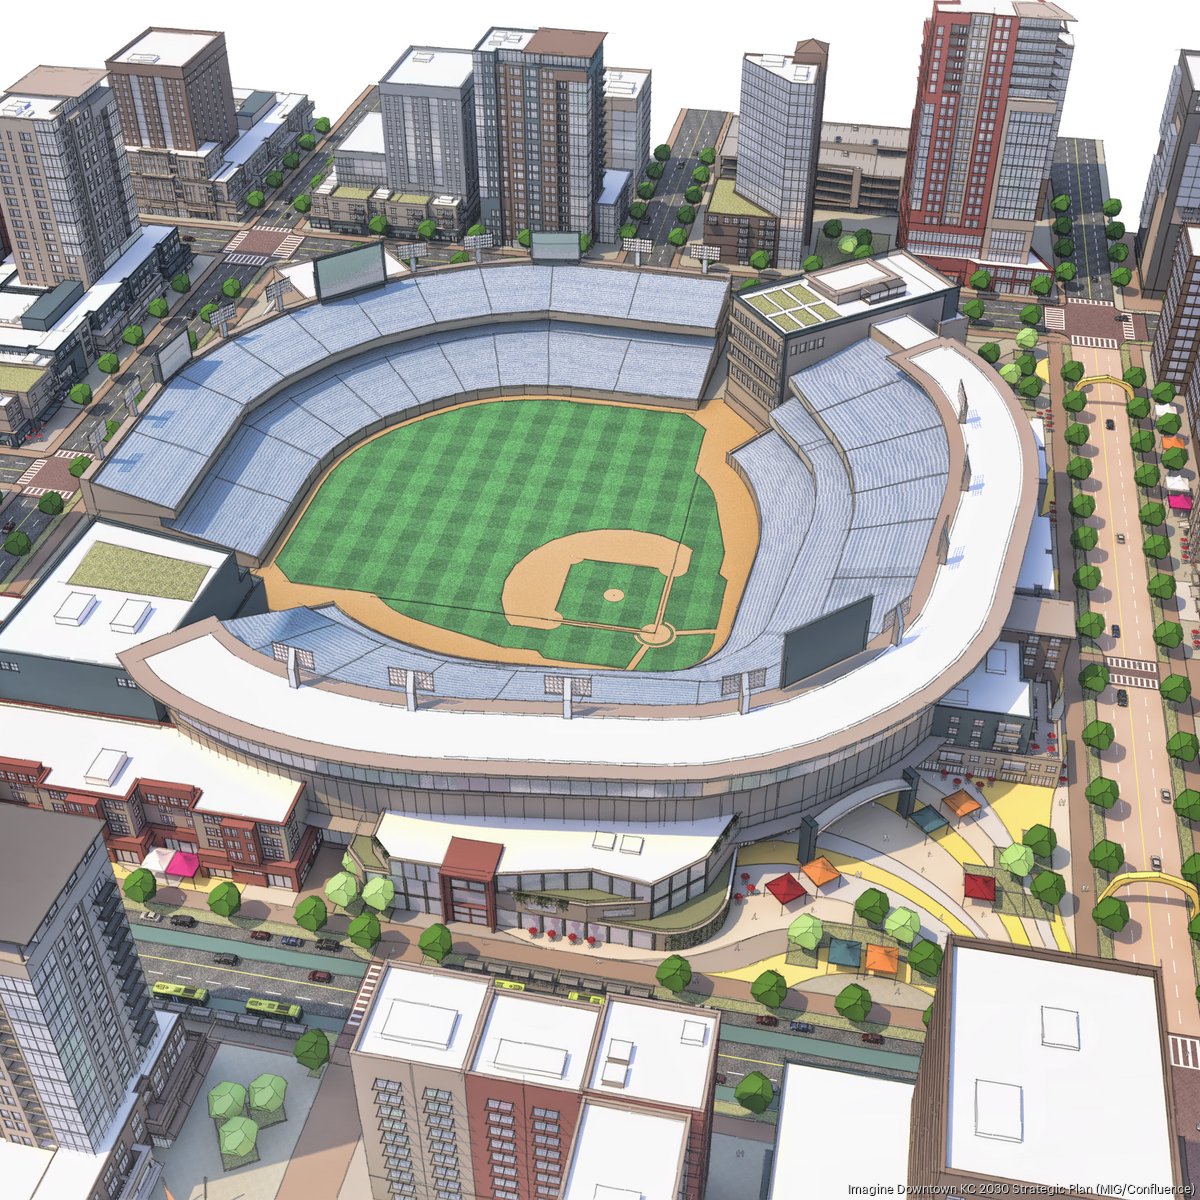 Royals announce 2 more public meetings for downtown stadium